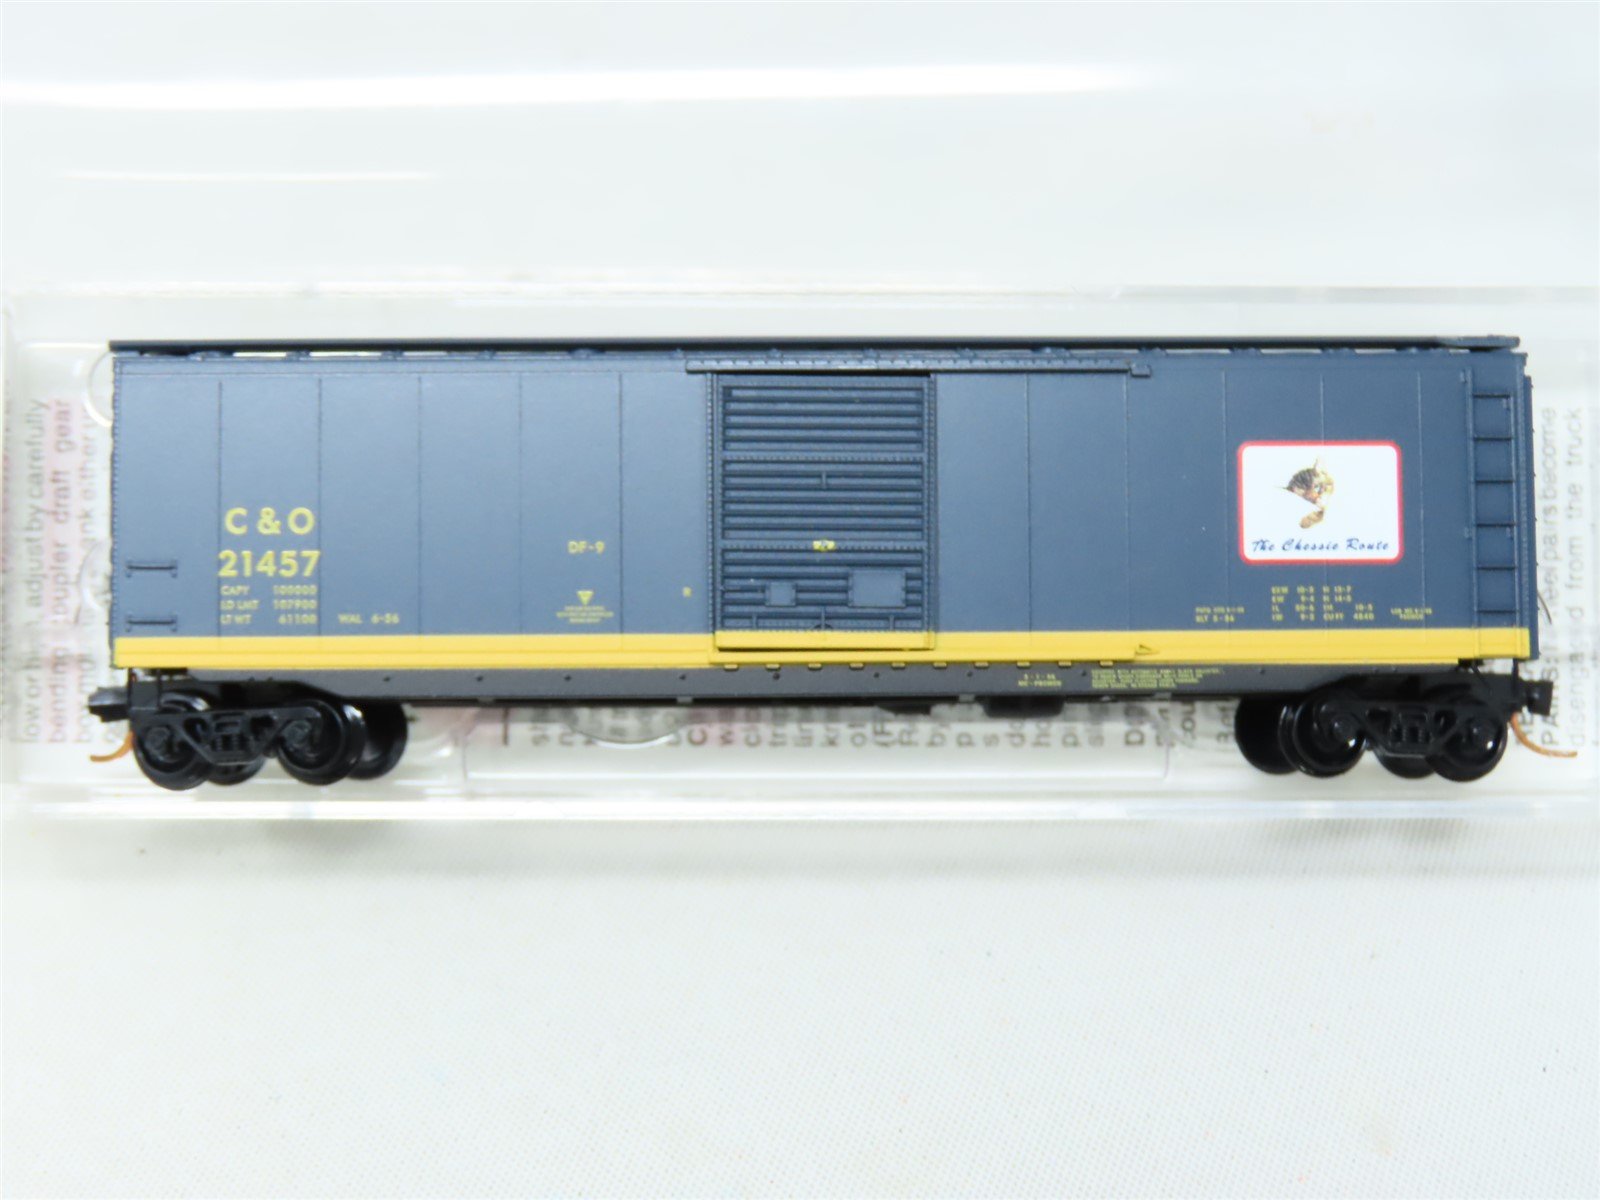 N Scale Micro-Trains MTL 03100075 C&O "The Chessie Route" 50' Boxcar #21457